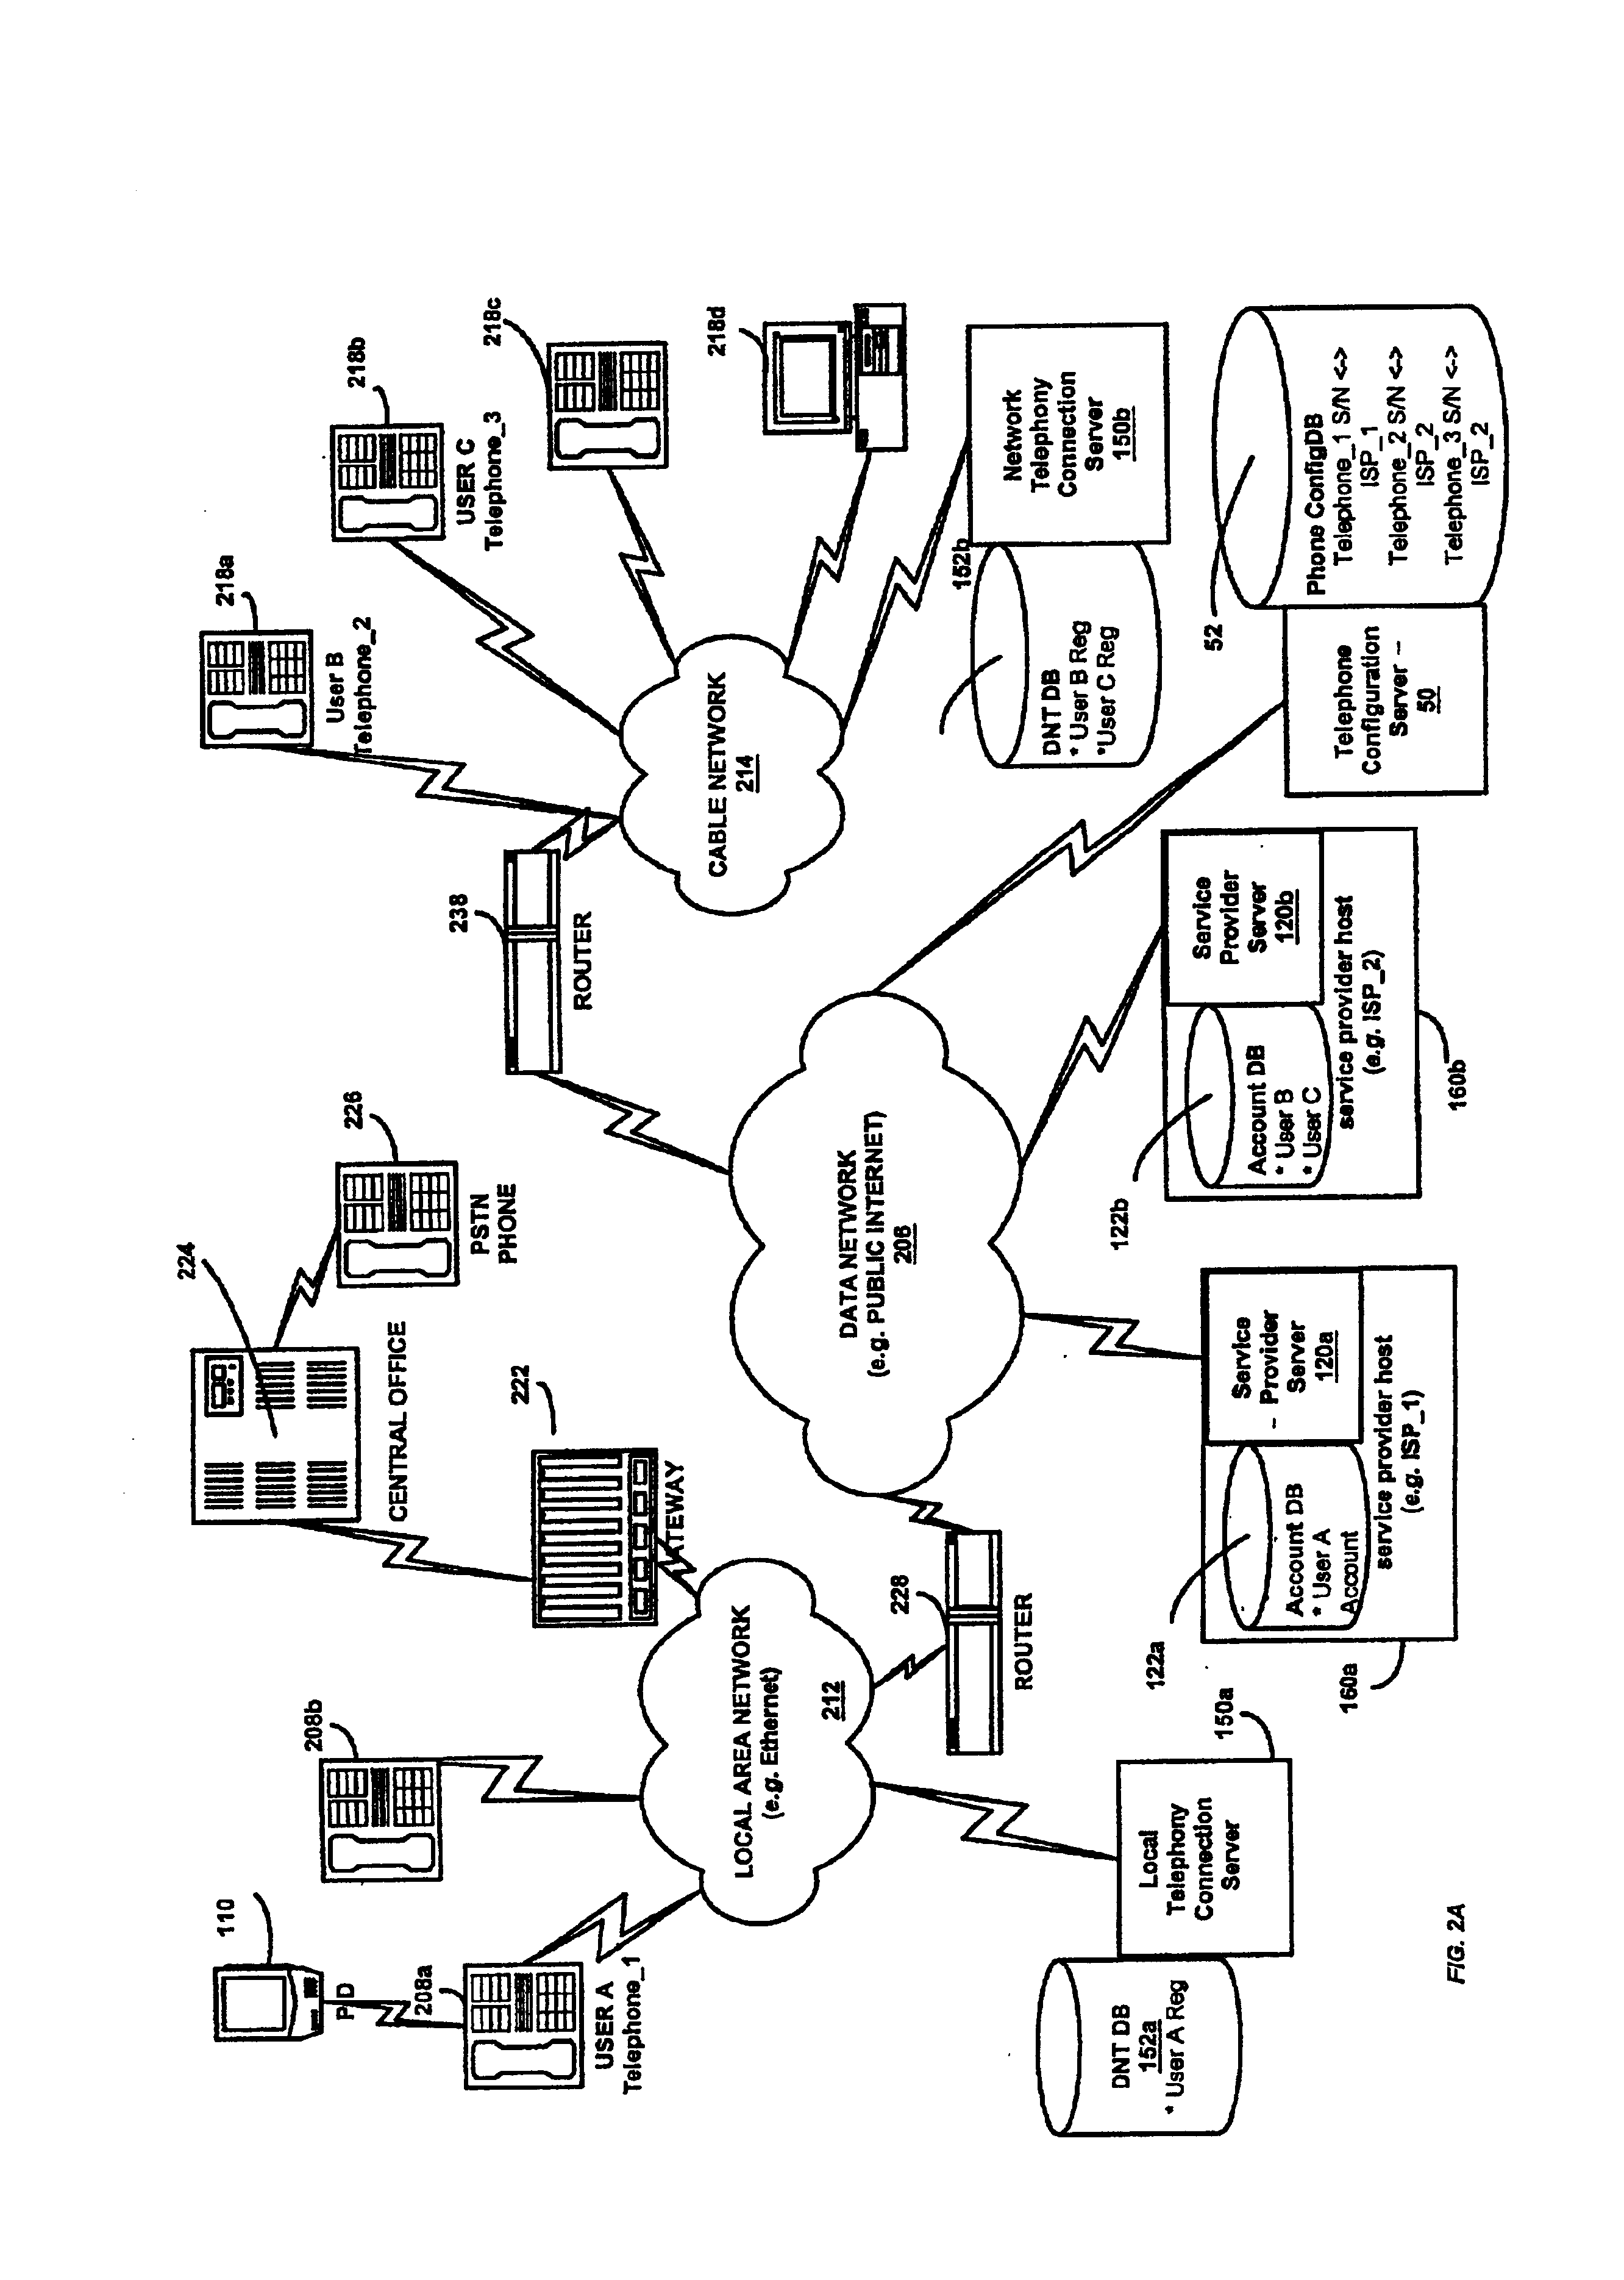 System and method for providing service provider configurations for telephones using a central server in a data network telephony system